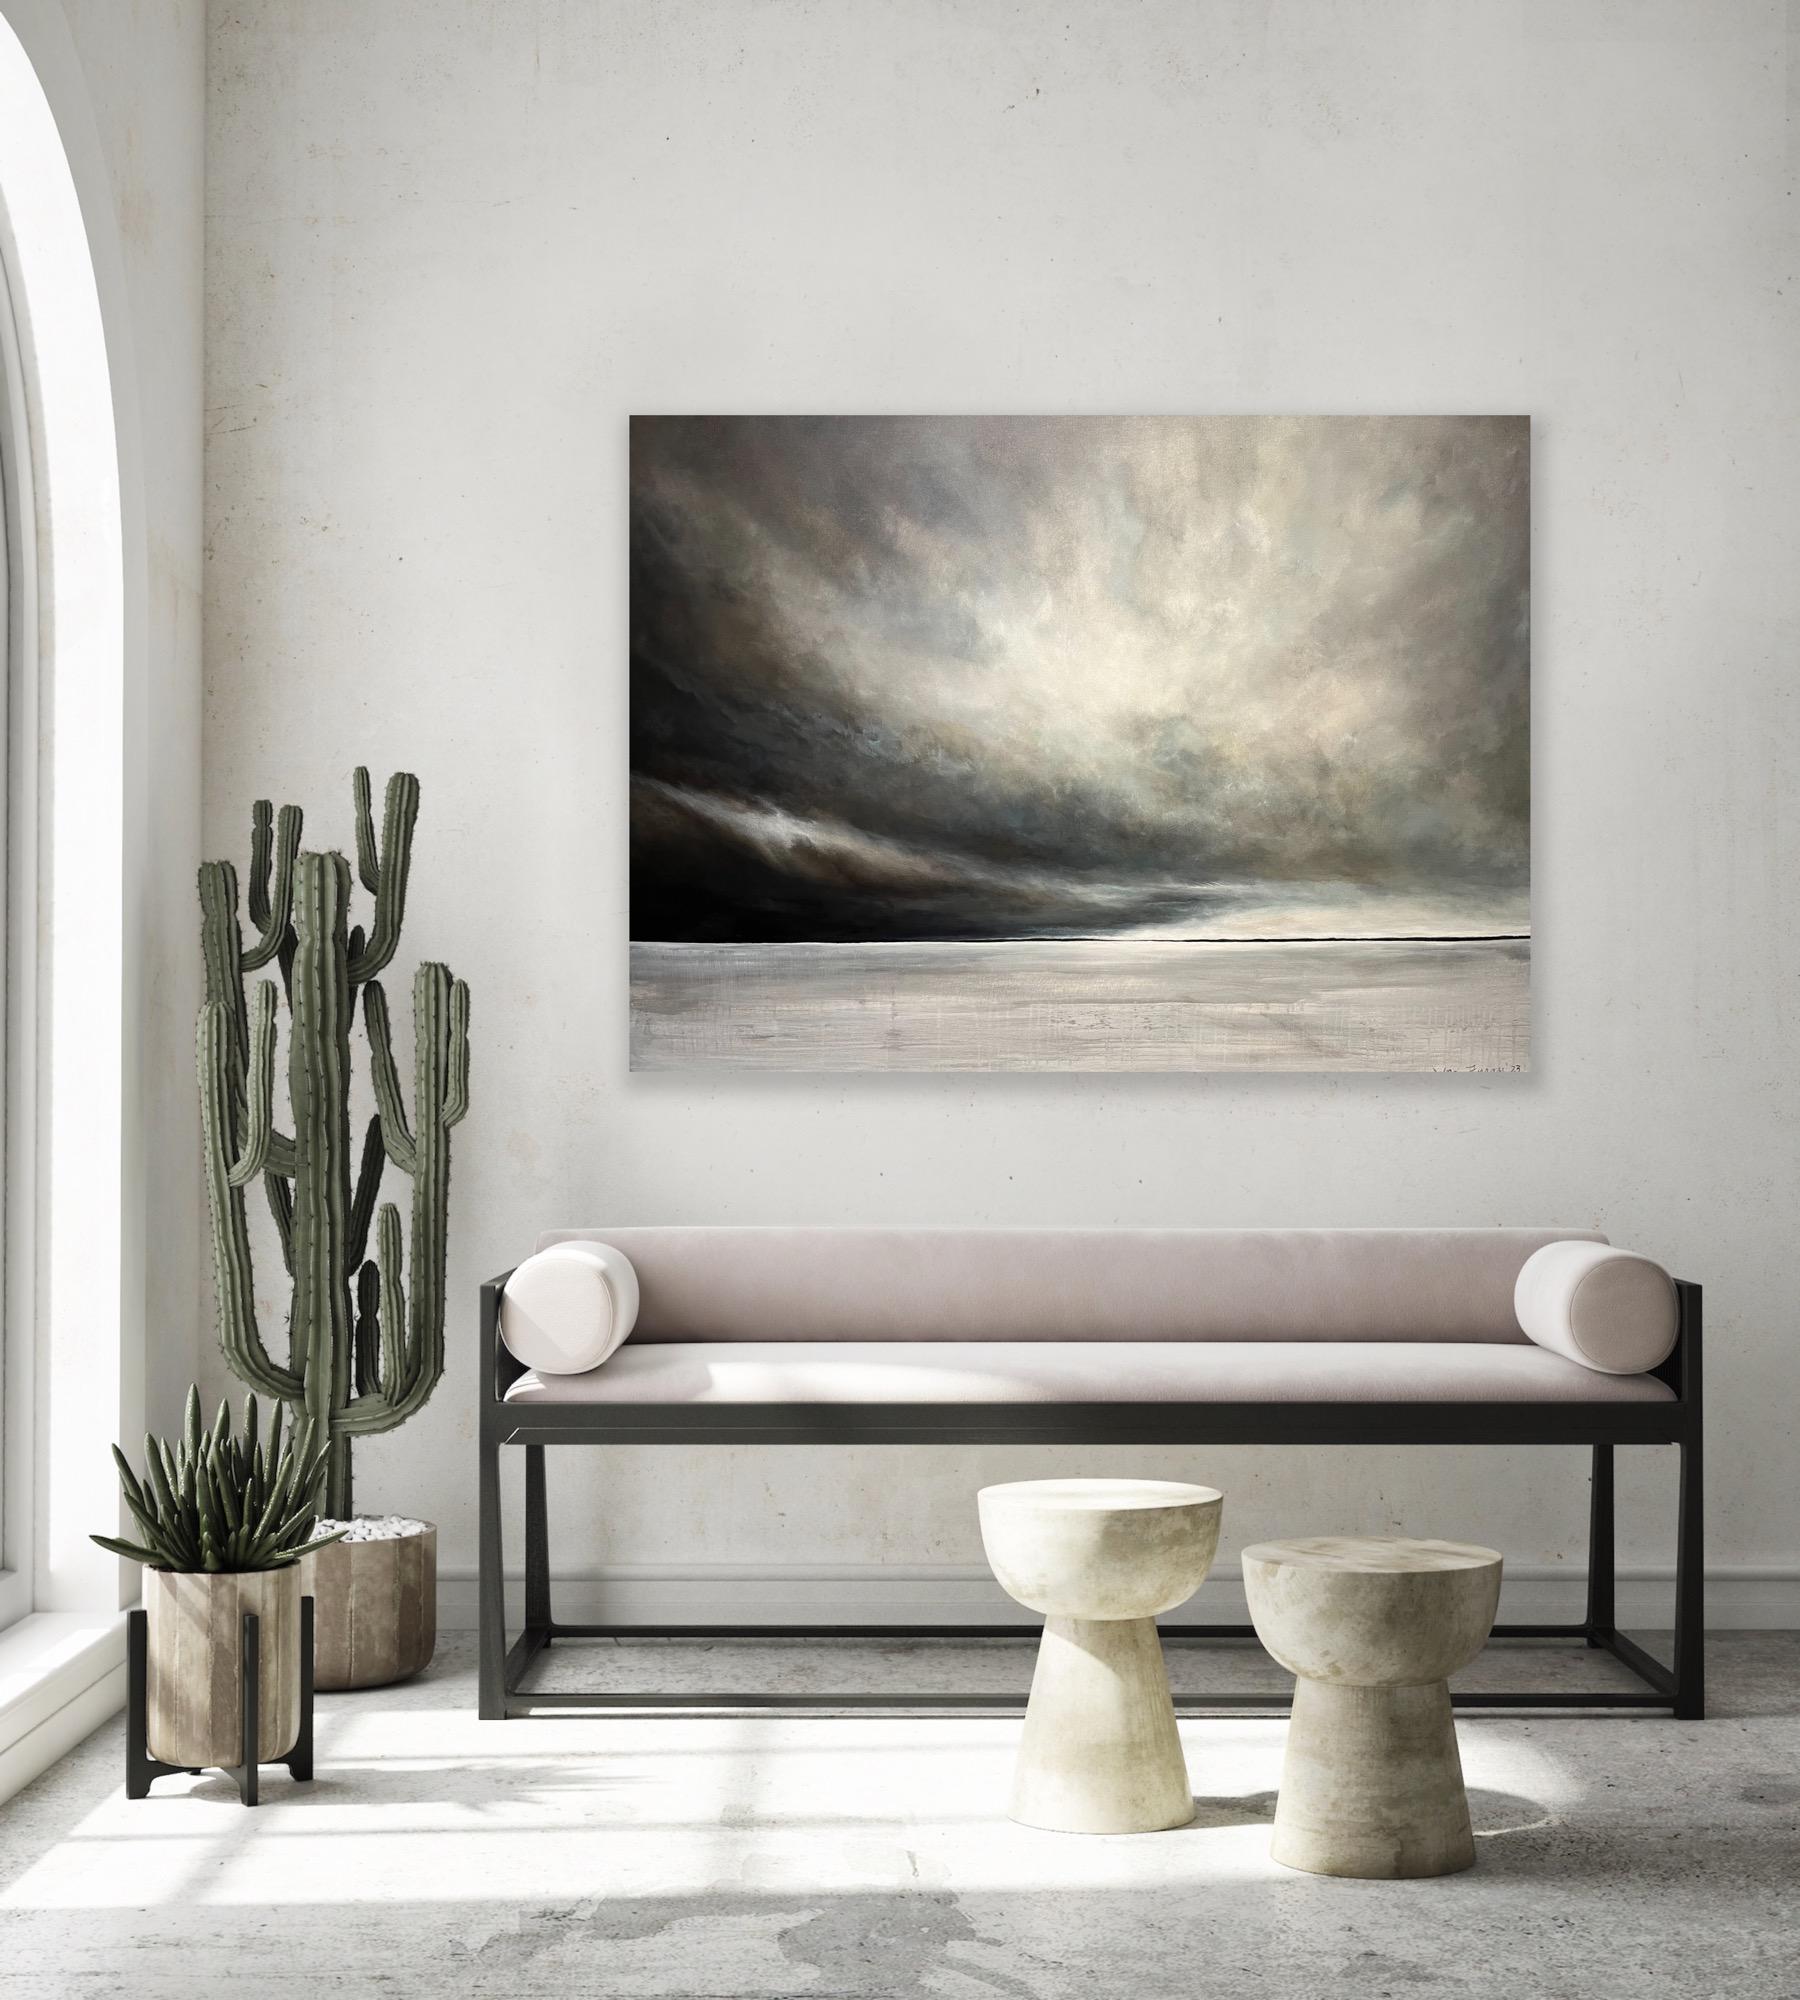 Tempest, a new contemporary painting capturing the raw energy and beauty of a stormy sky. Dominated by a palette of deep moody black and gray tones. Tempest invites you to contemplate the awe and power of the natural world.

